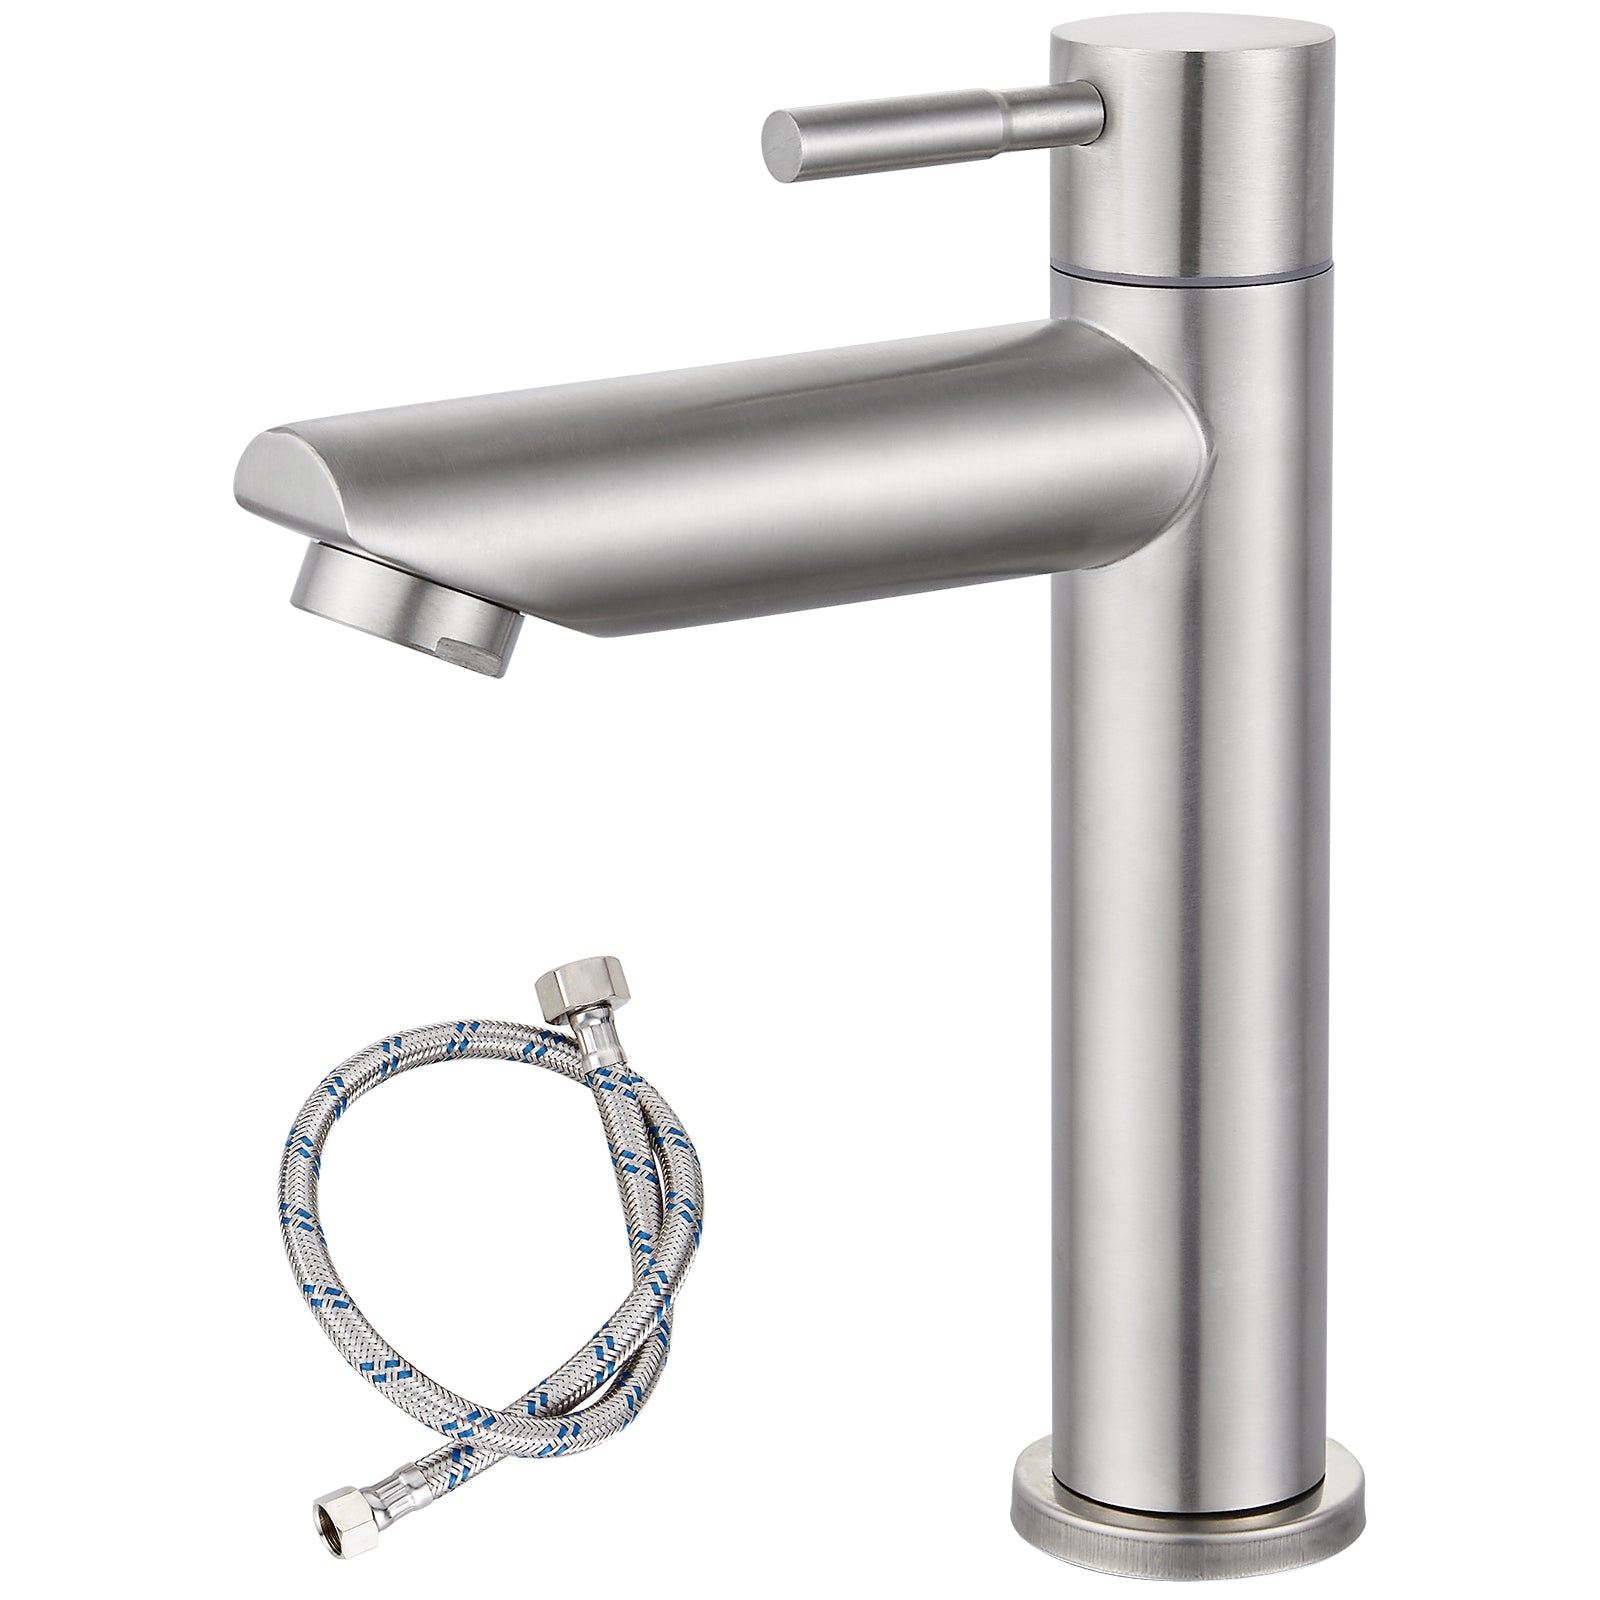 Cold Water Only Bathroom Sink Faucet Stainless Steel SUS304 Brushed Nickel Single Handle One Hole Deck Mount Lavatory Faucet (Drain Not Included)